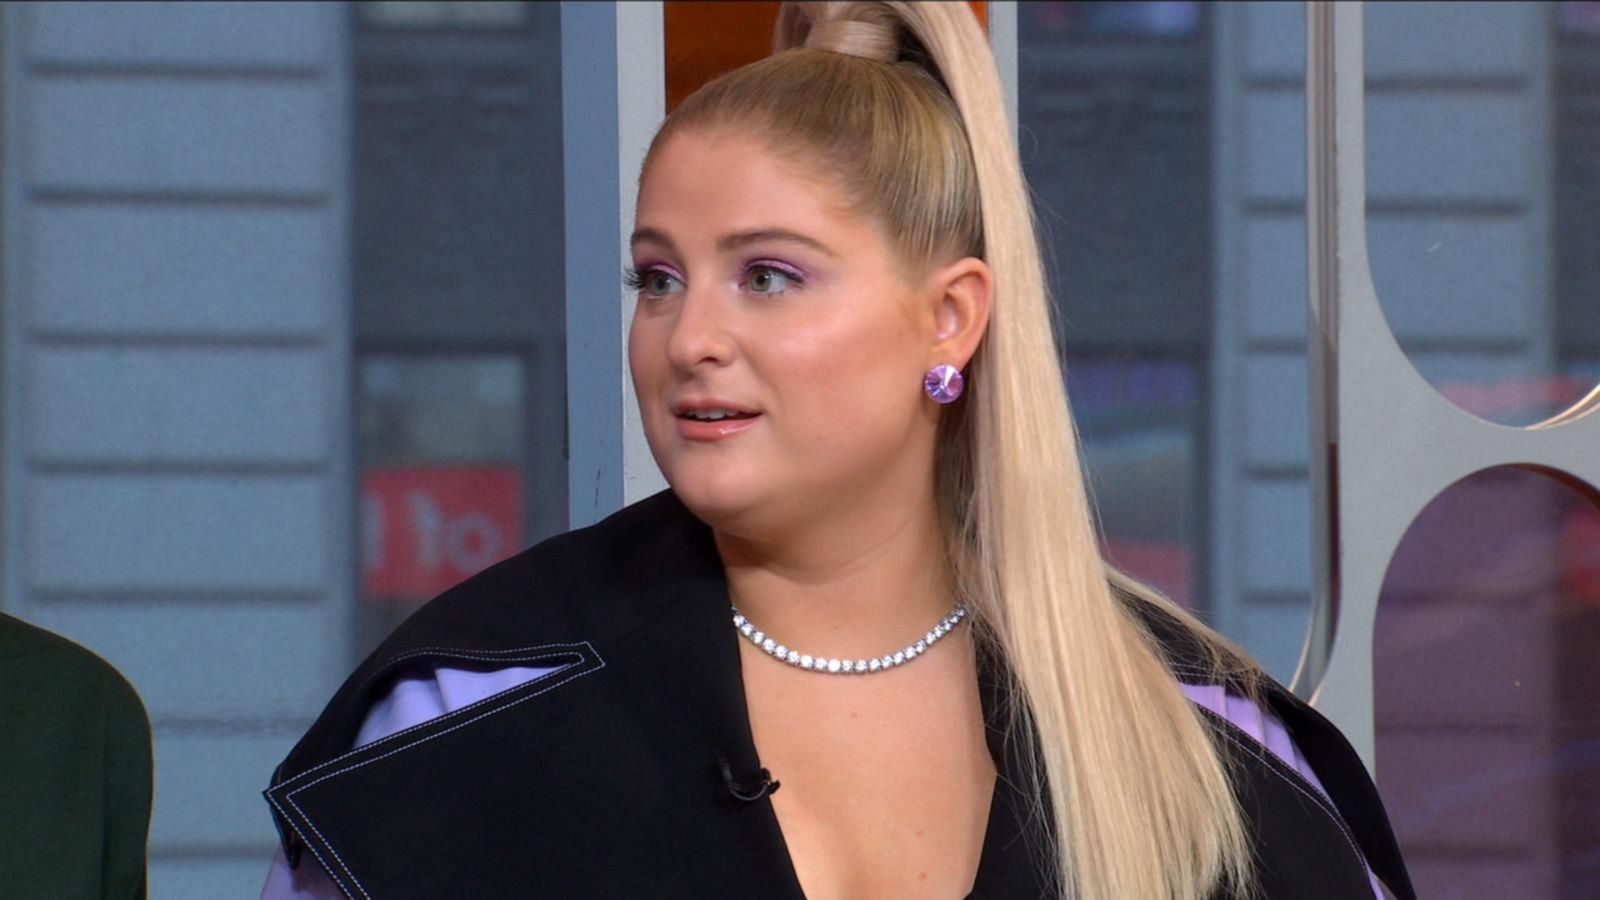 Meghan Trainor weight loss: 11 things we know she did